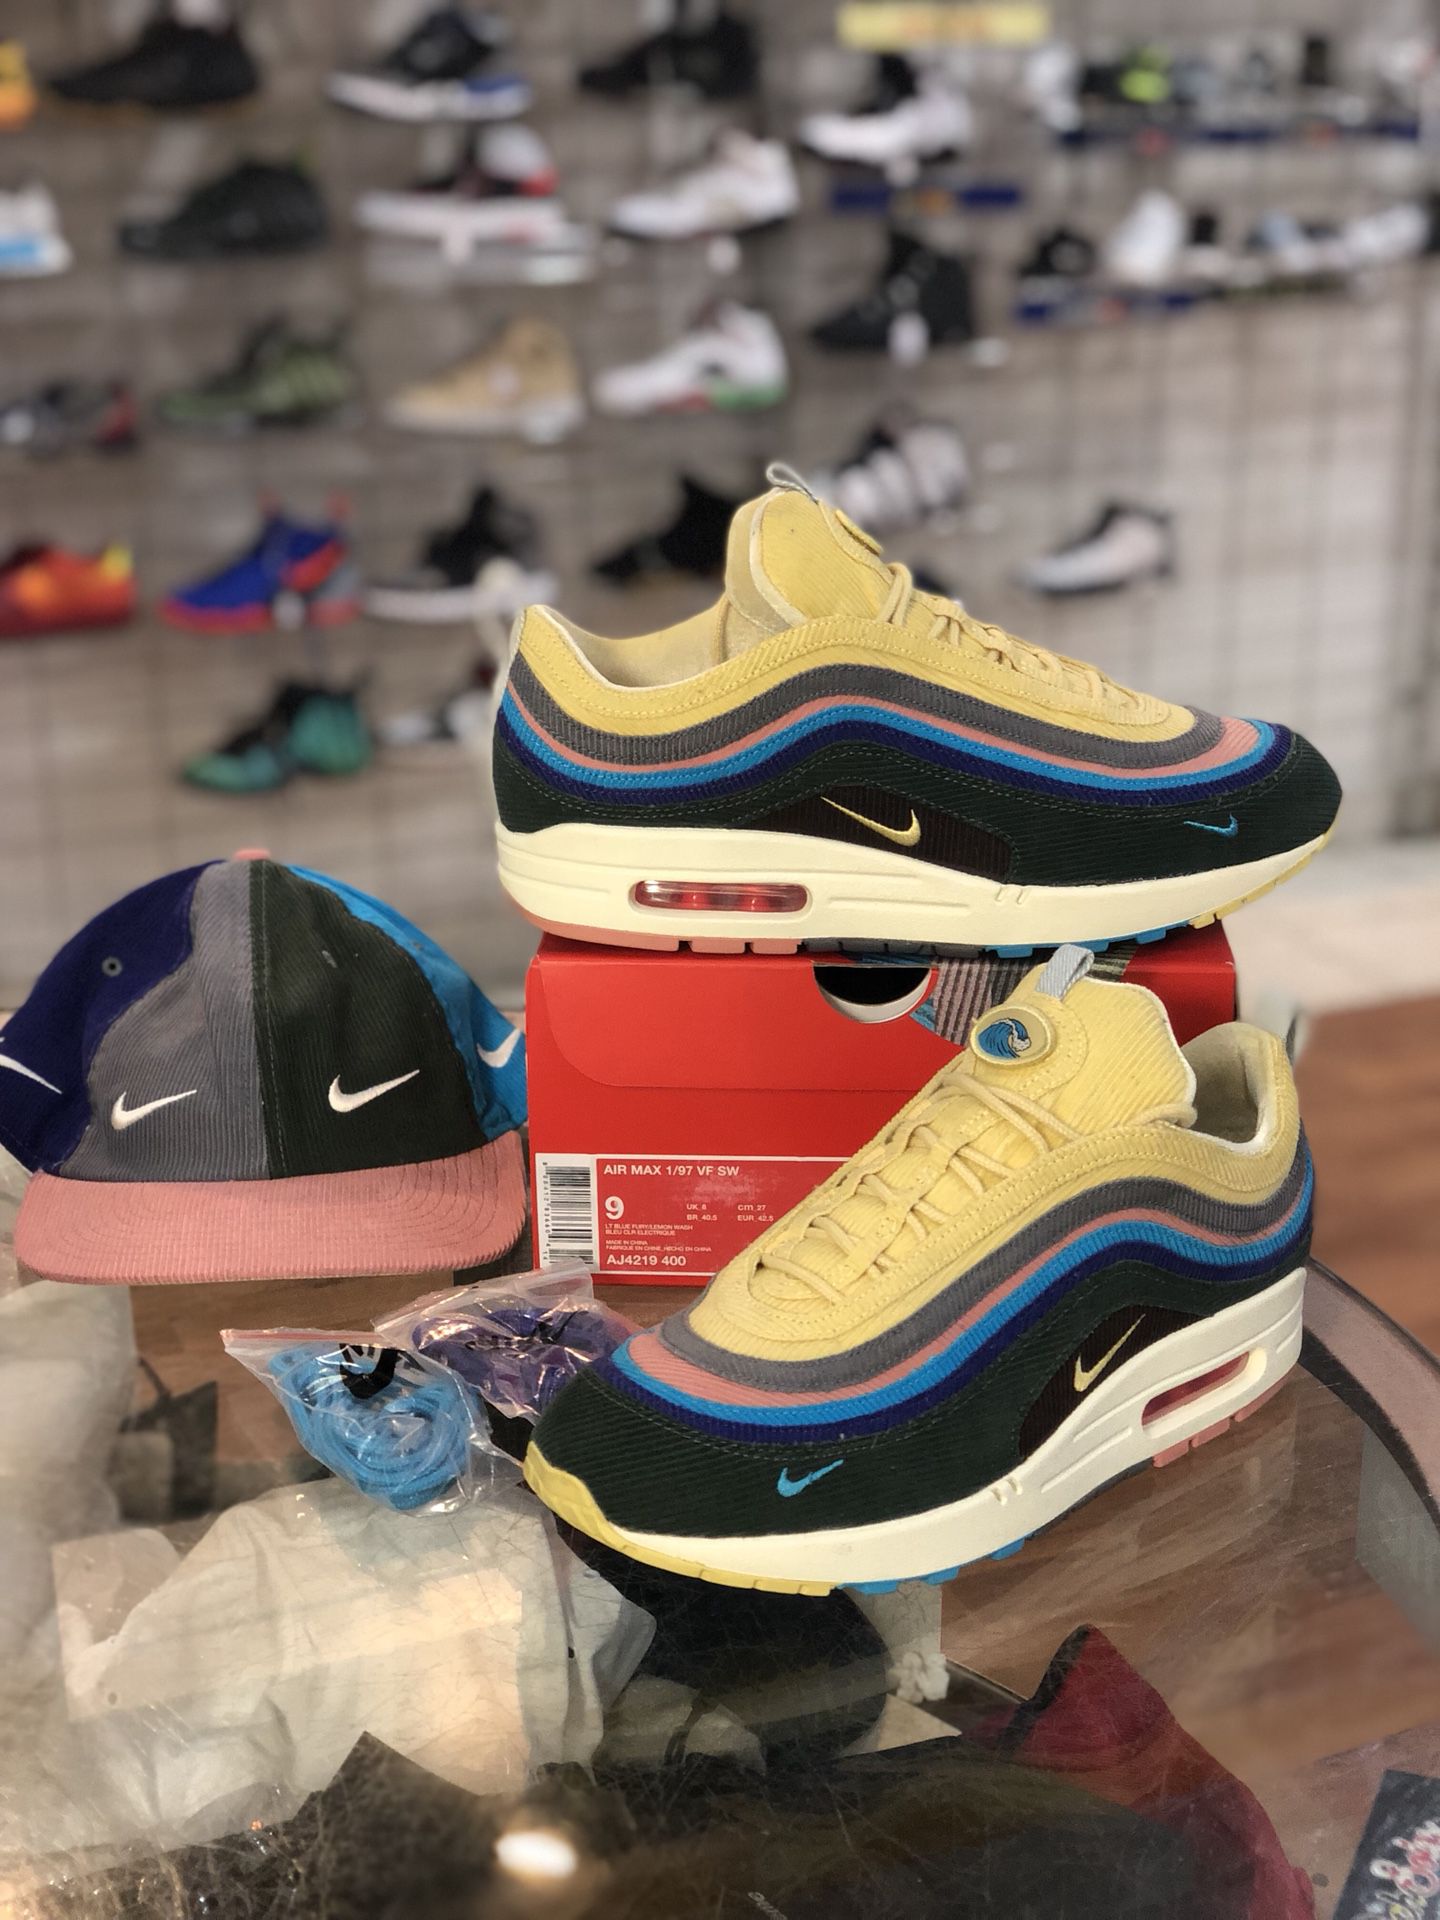 Sean Wotherspoon Air Max 1/97 size 9 with Sean Wotherspoon hat